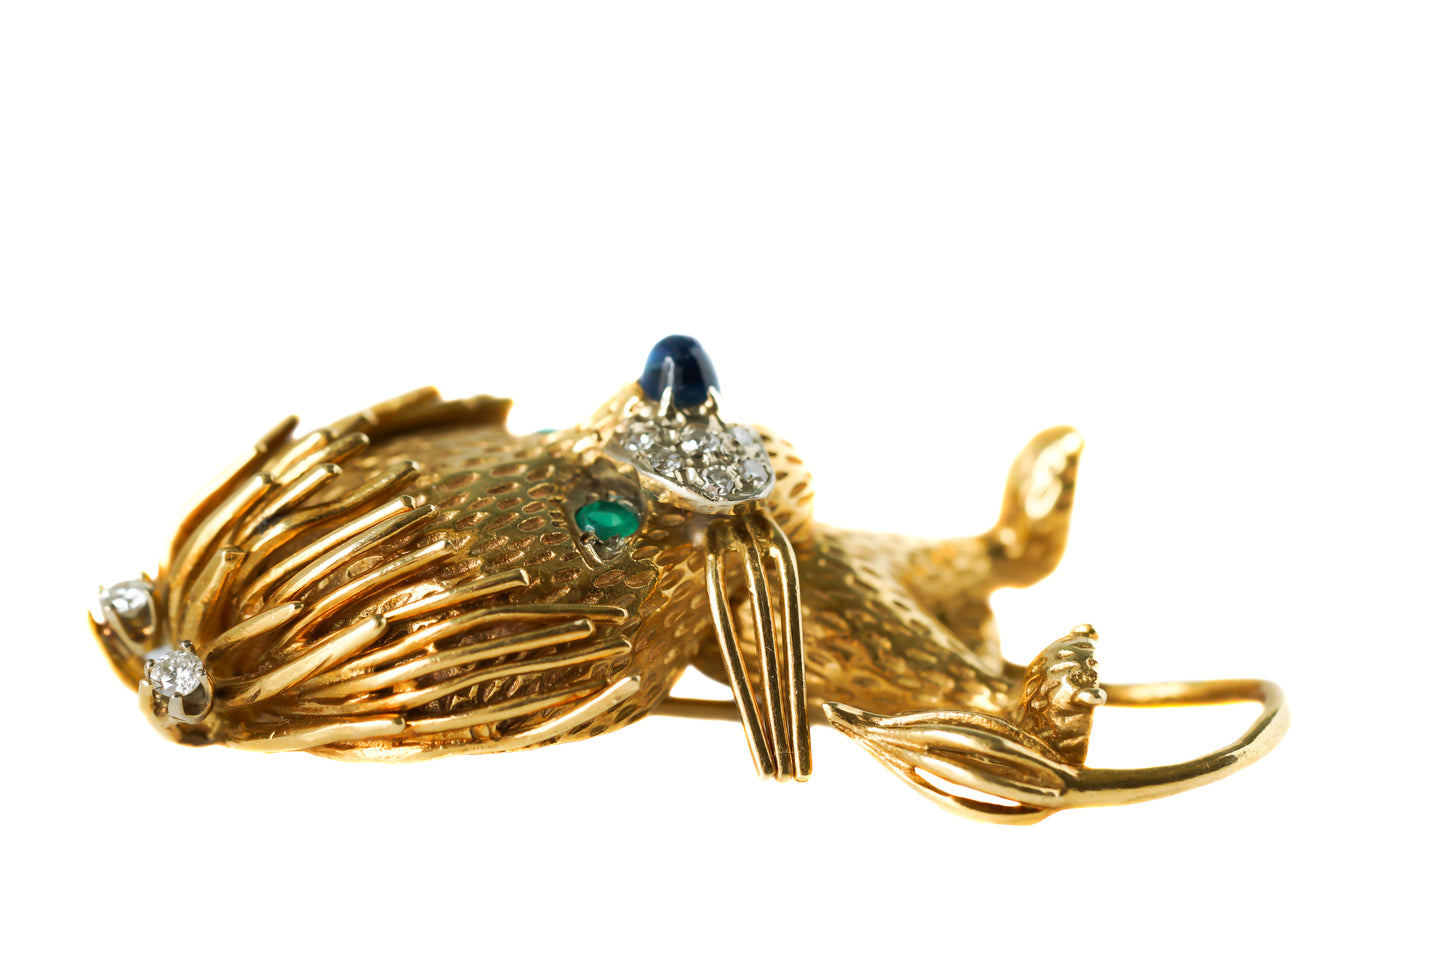 18k Gold Lion Brooch with Diamonds Emeralds Sapphires